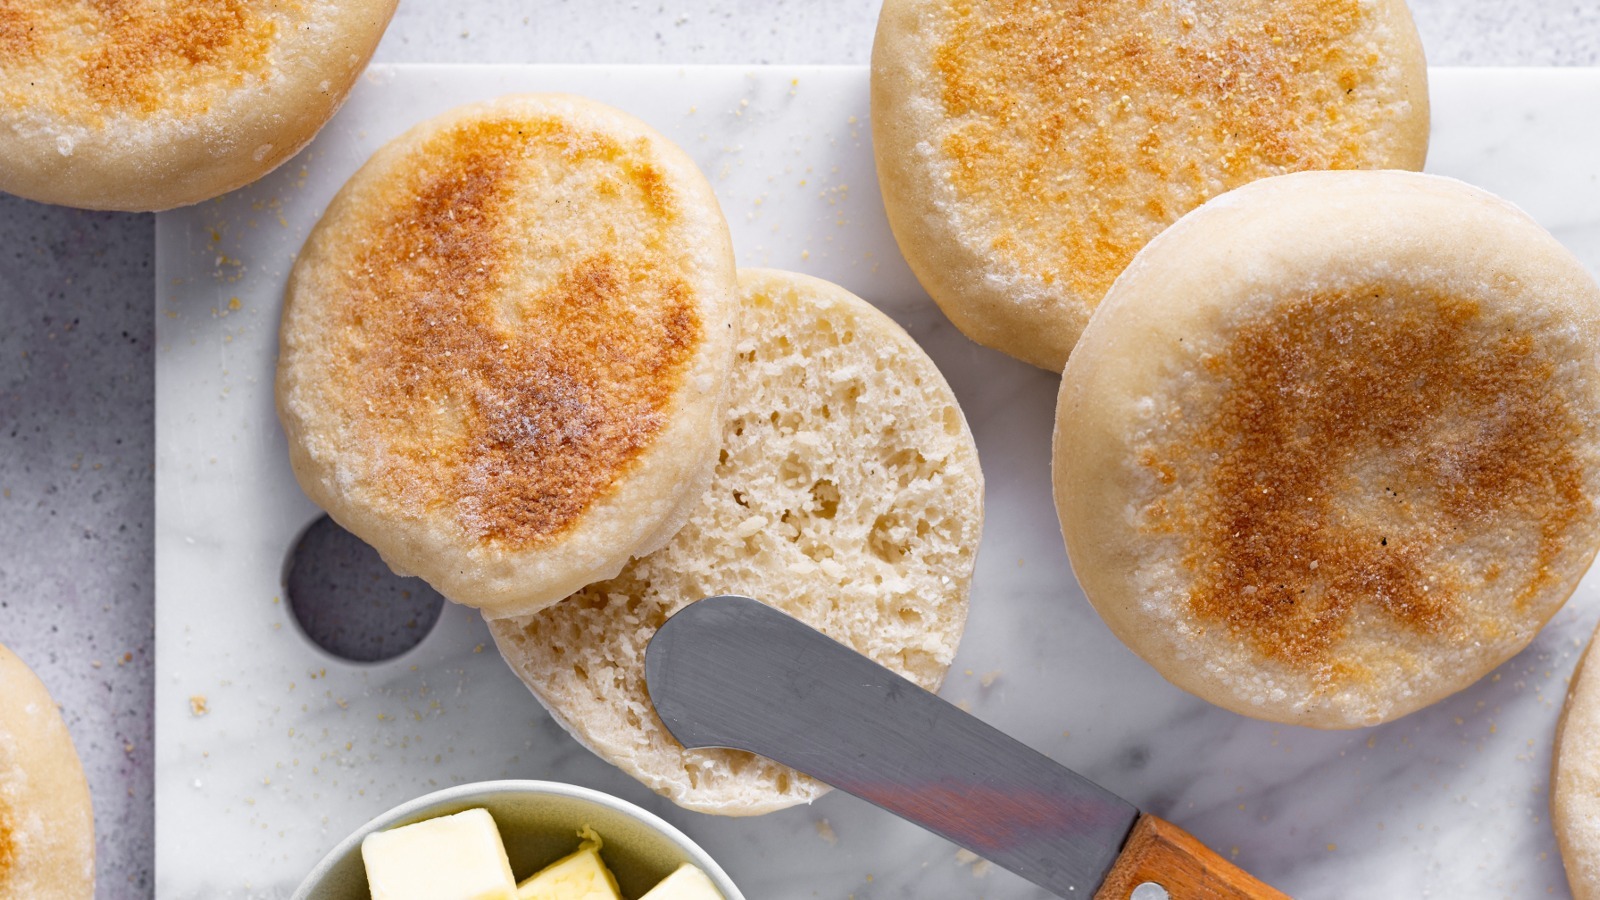 The Simple Hack For A Perfectly Split English Muffin